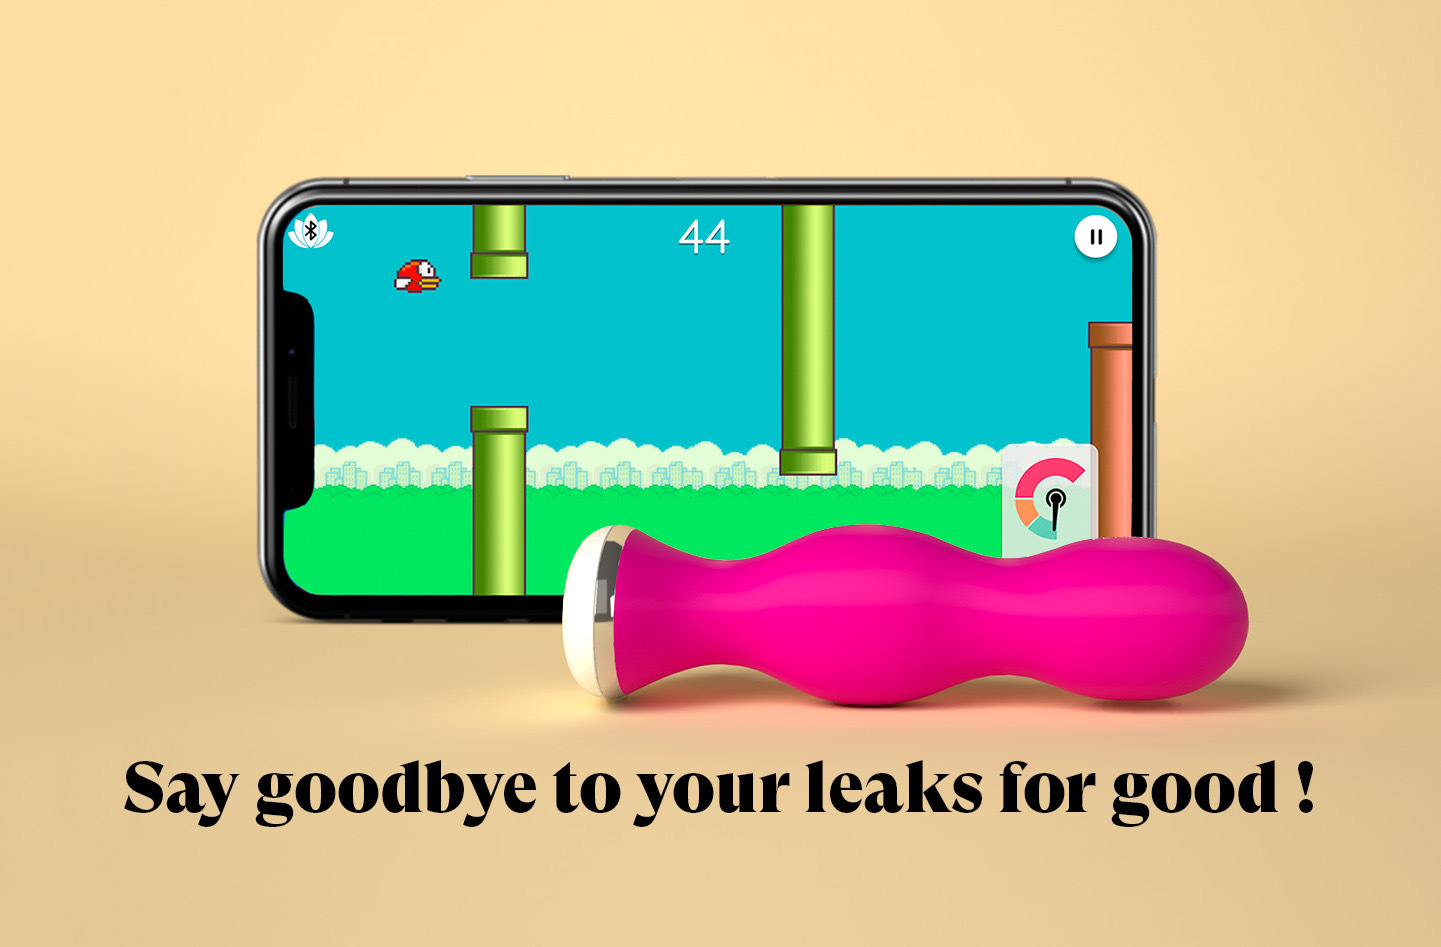  Say goodbye to your leaks for good ! 